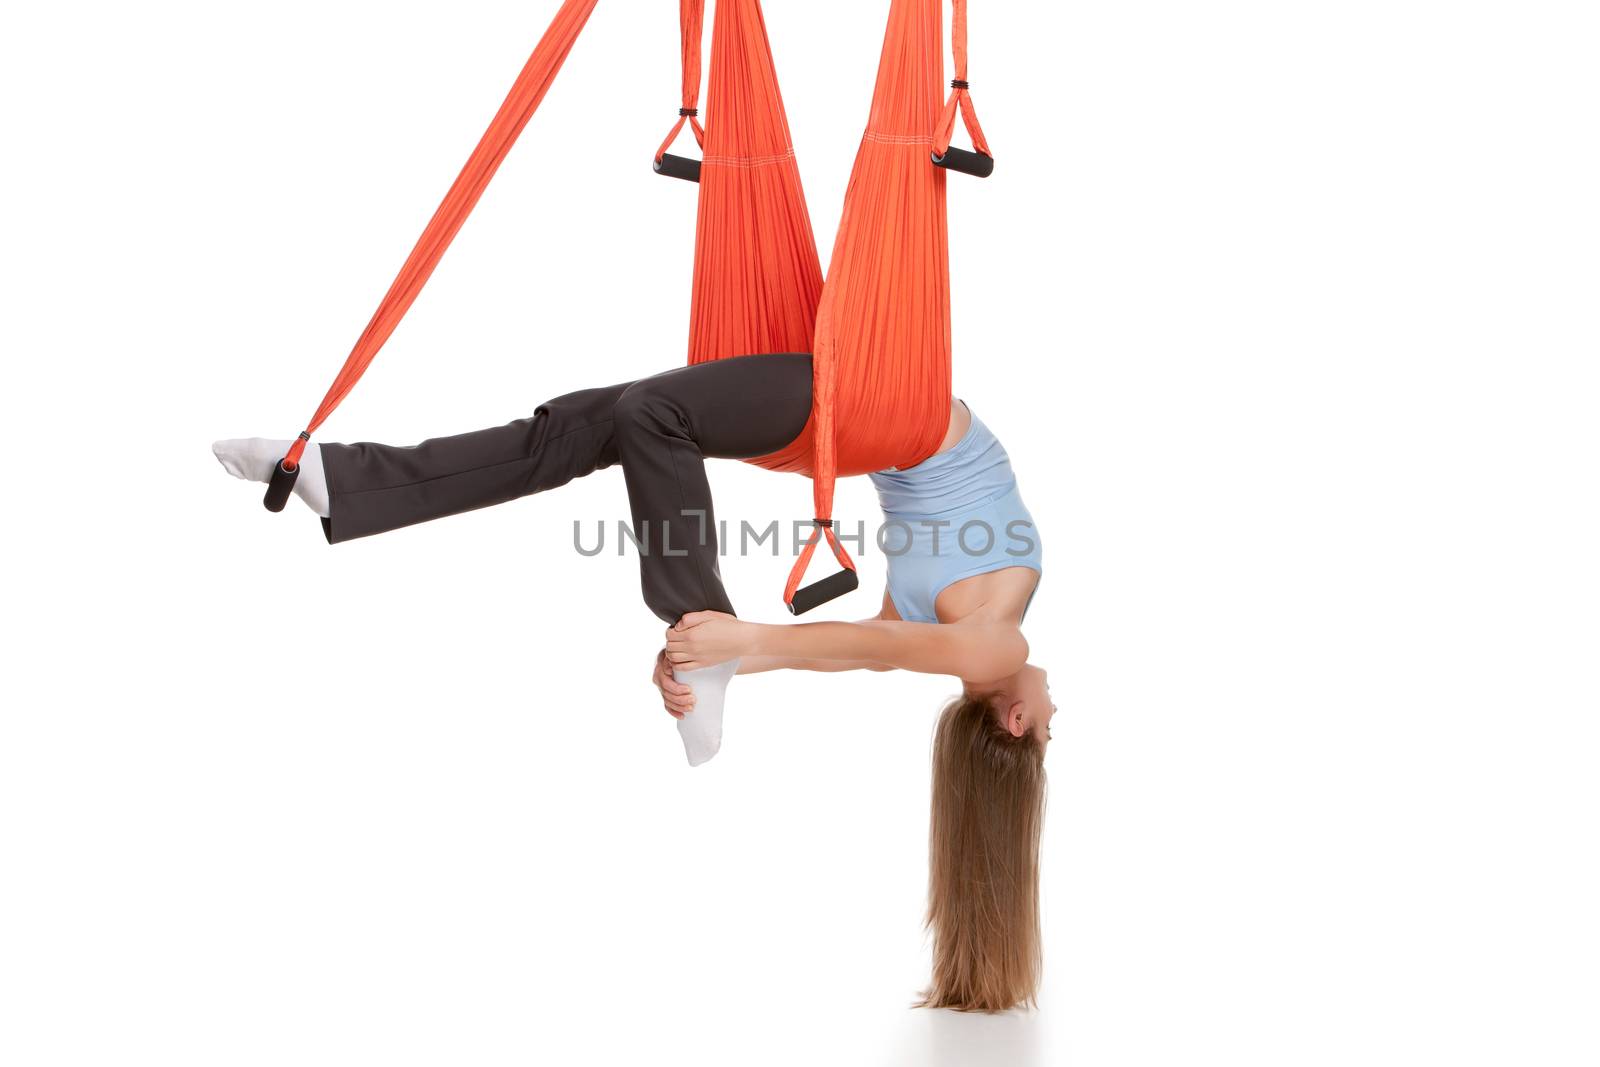 Young woman upside down doing anti-gravity aerial yoga in hammock on a seamless white background.